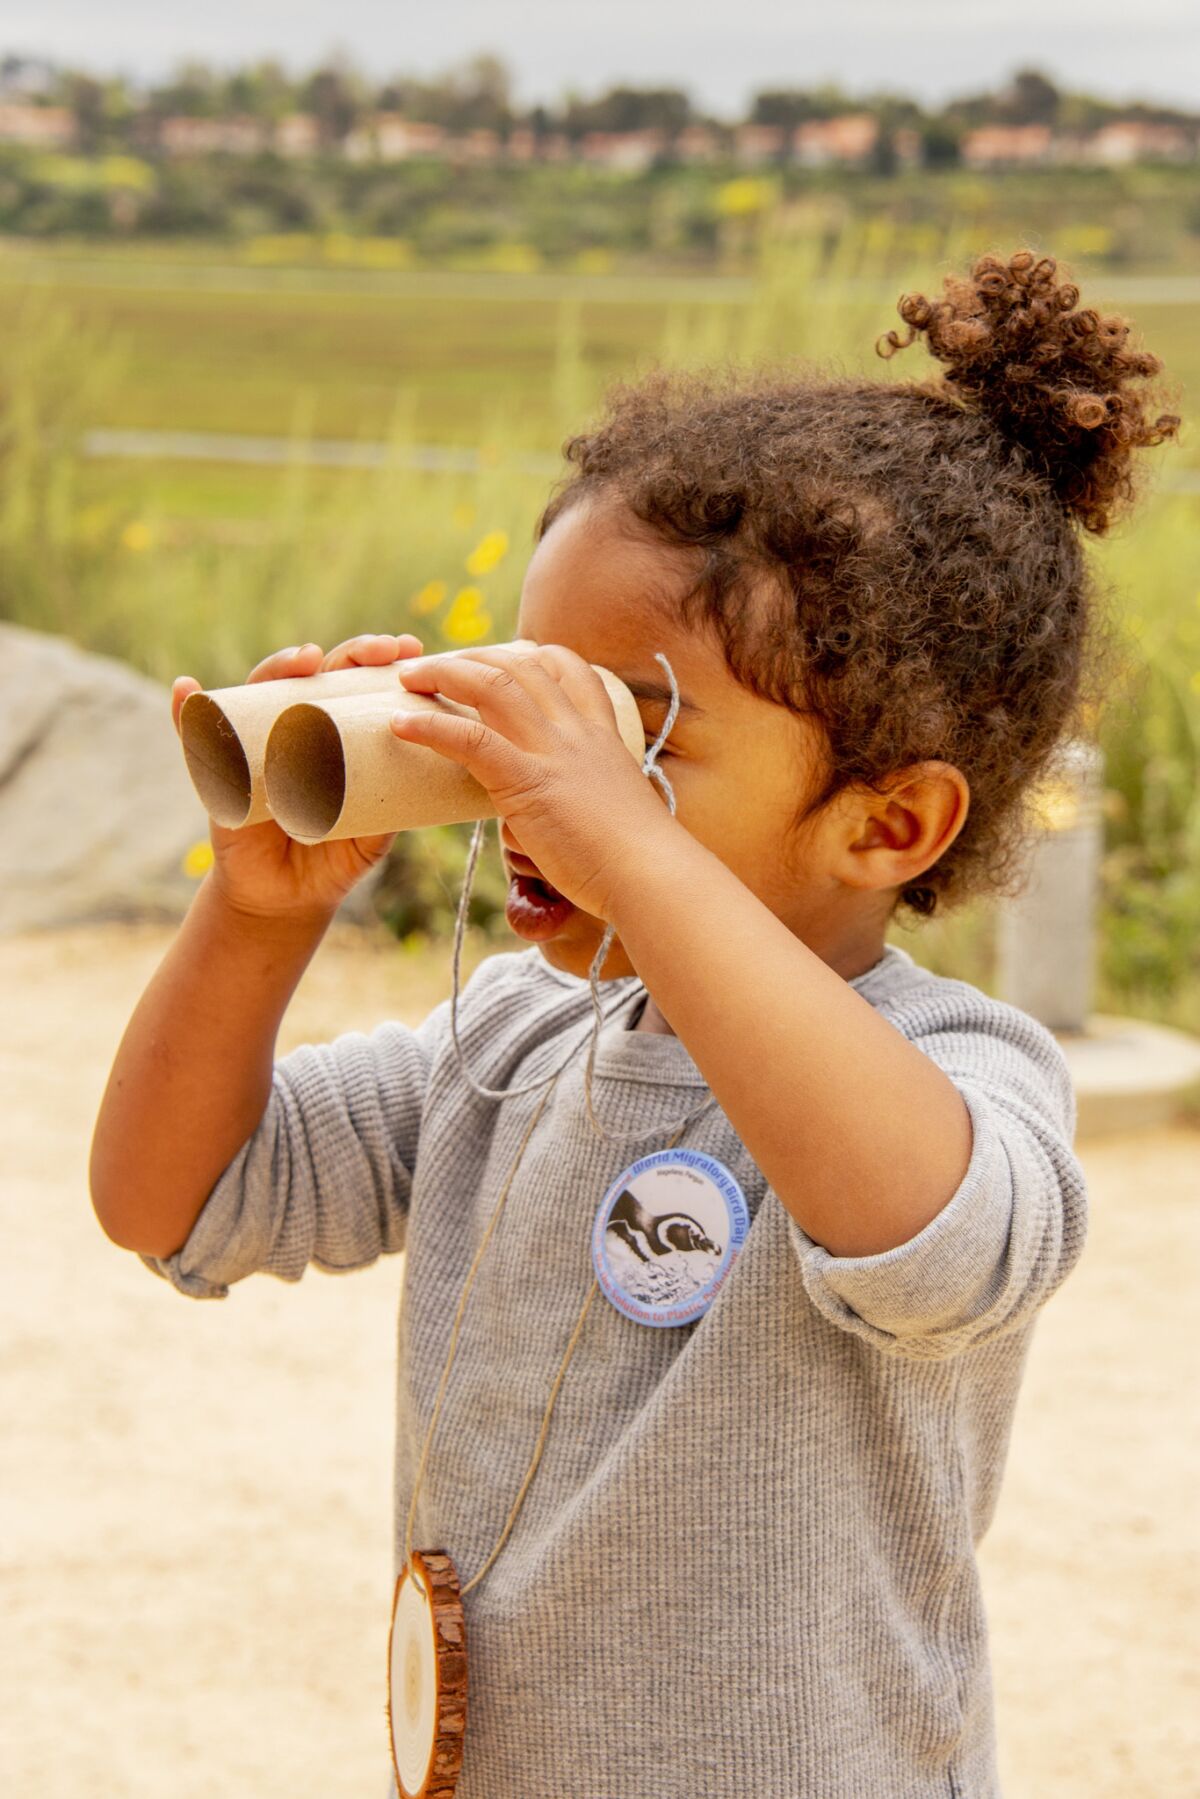 Lyam Allah looks for winged wildlife through cardboard binoculars during April's "Earth Day at the Bay" festivities at the Peter and Mary Muth Interpretive Center in Newport Beach.